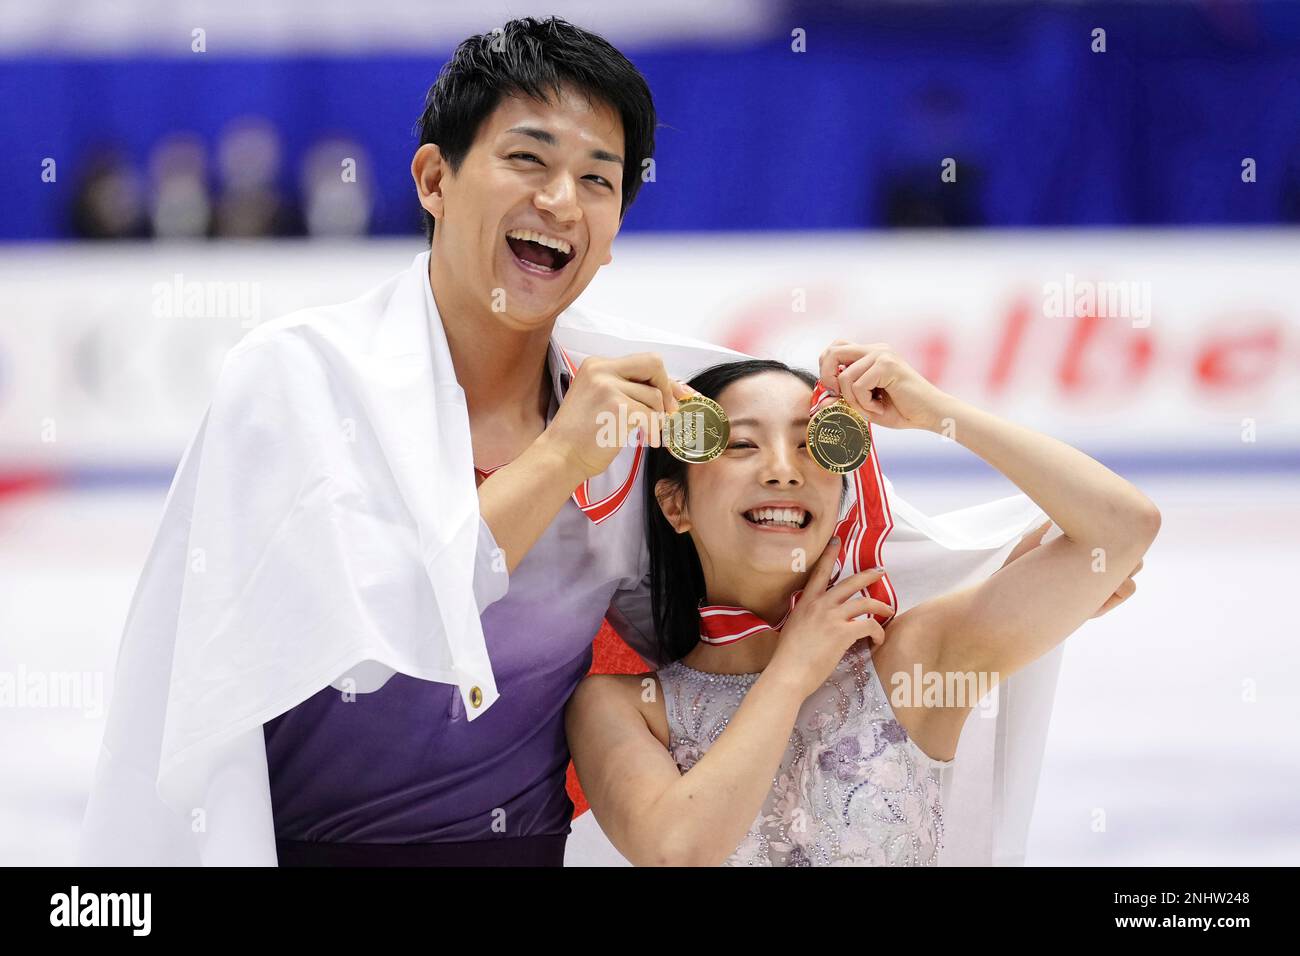 Japans Riku MIURA (R) and Ryuichi KIHARA show their gold medal after winning their first Pair Free Skating of NHK Trophy at Makomanai Sekisui Heim Ice Arena in Sapporo, Hokkaido Prefecture on